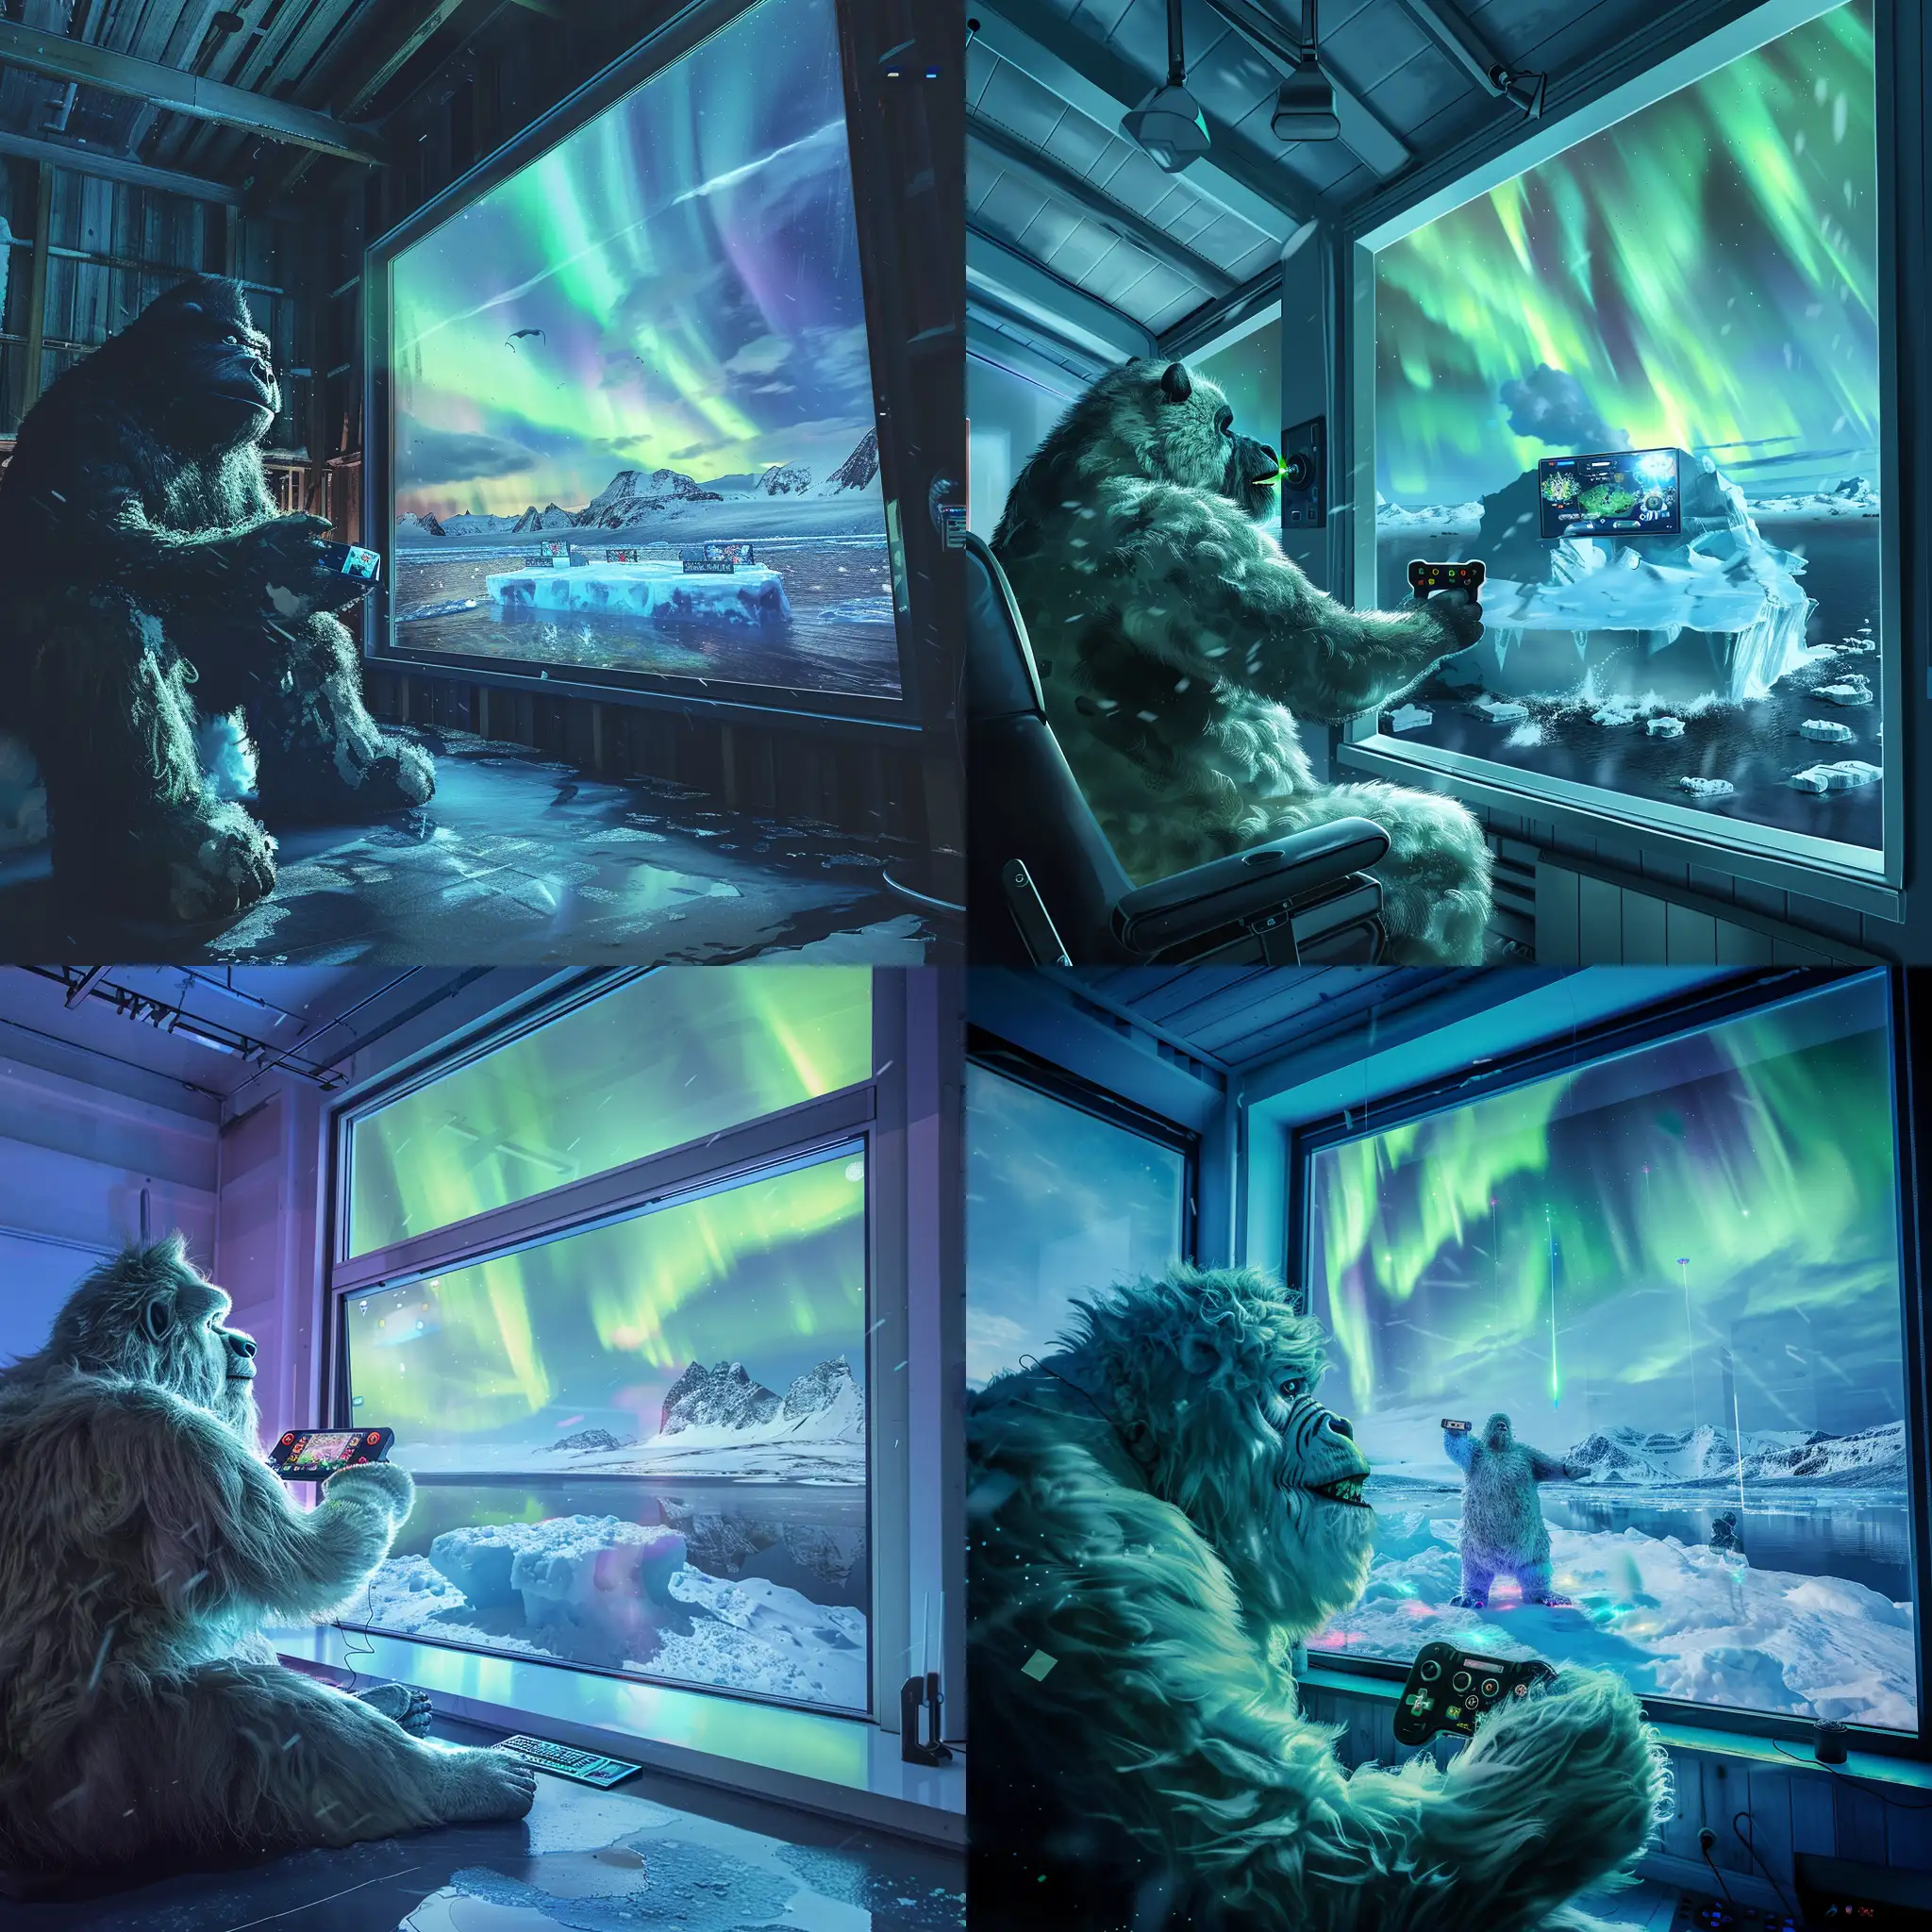 Friendly-Yeti-Playing-Video-Games-on-Iceberg-with-Northern-Lights